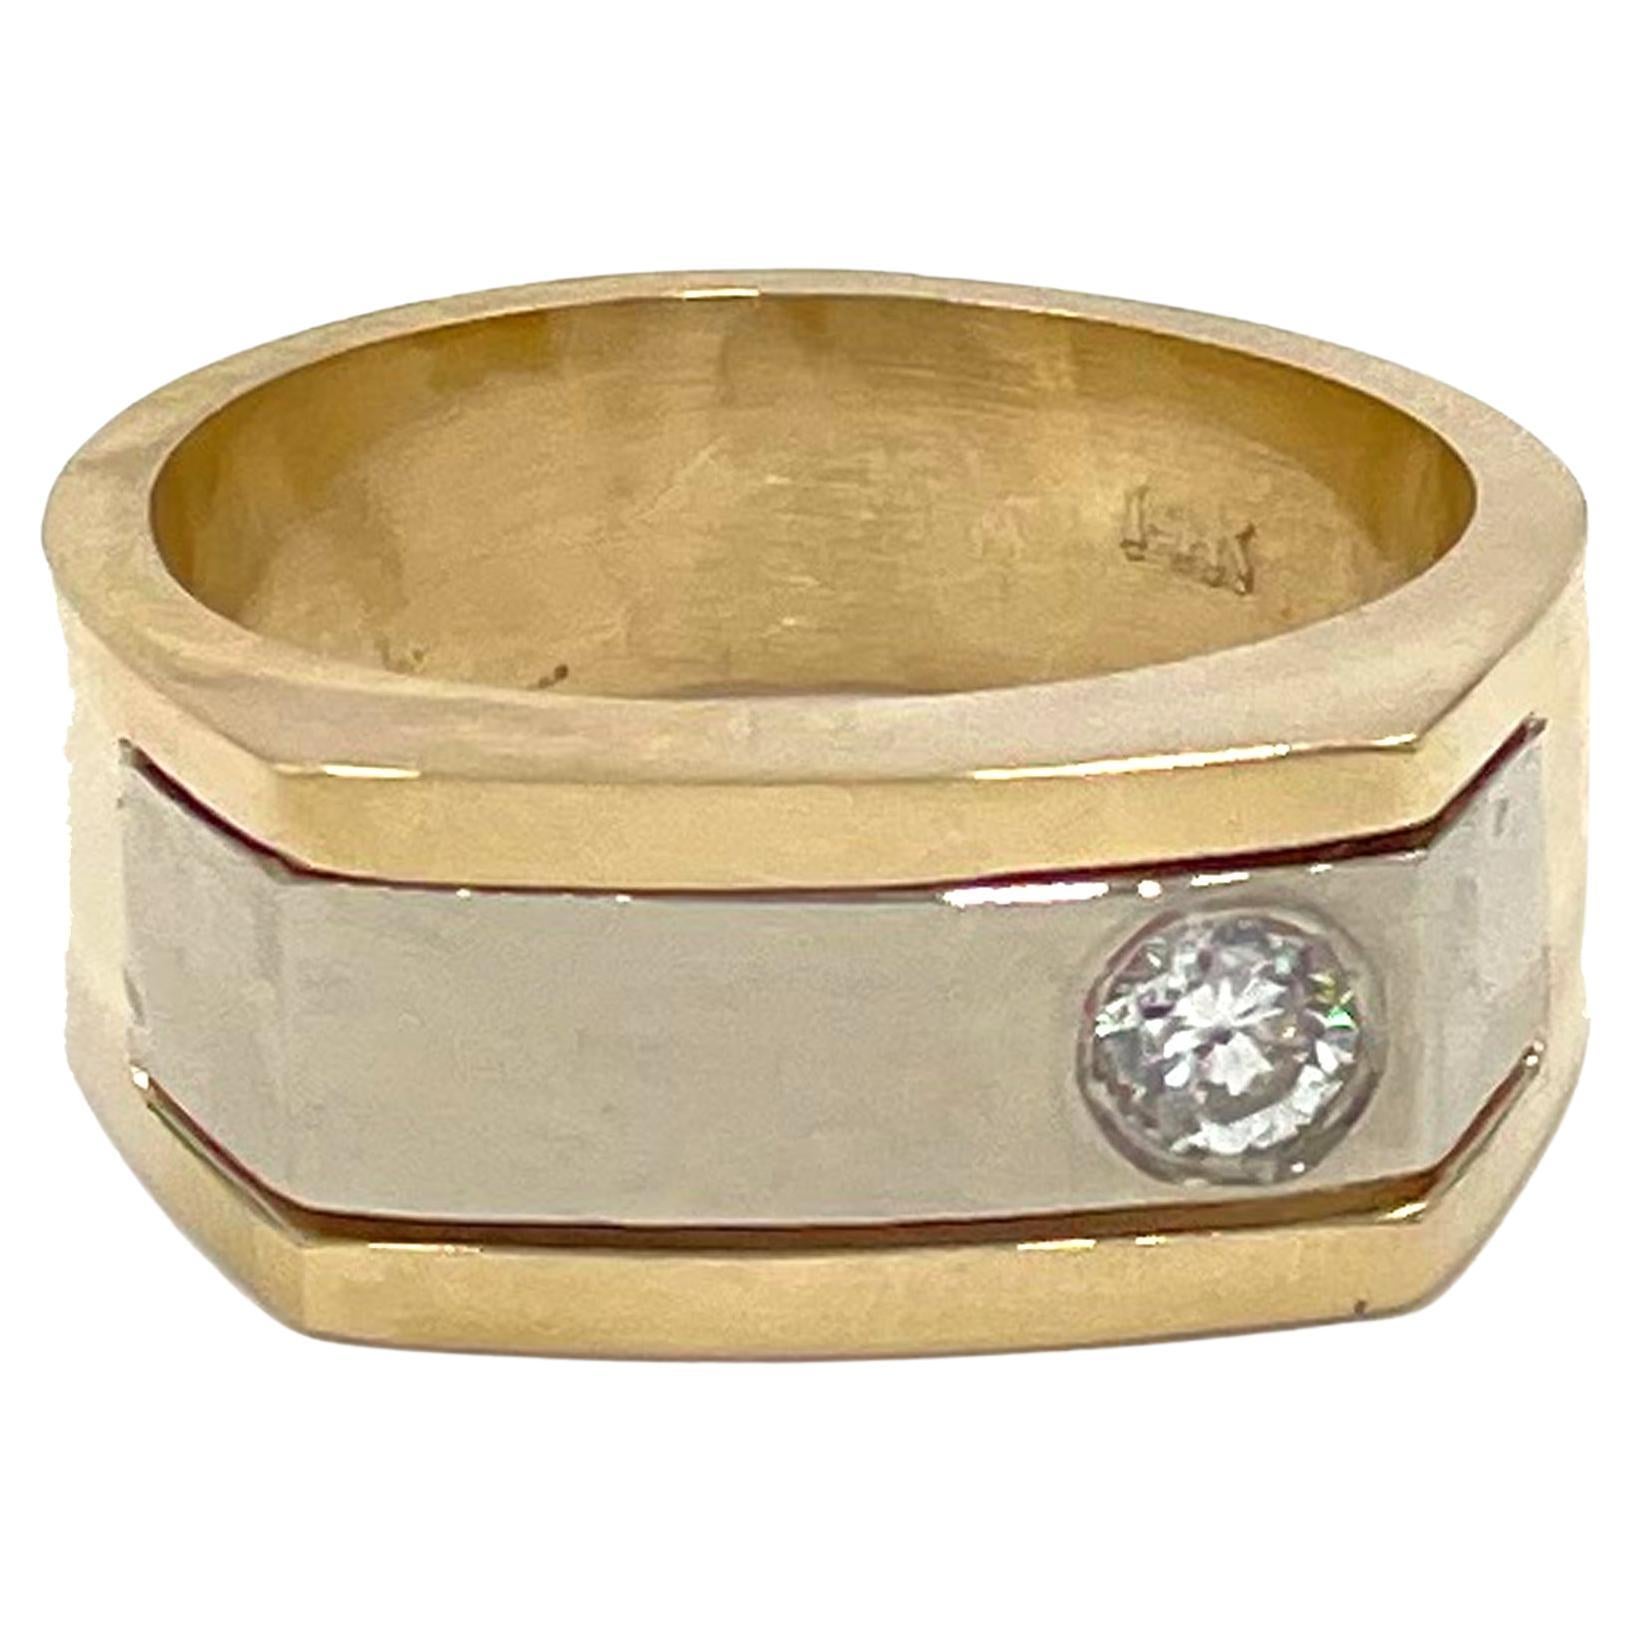 14K White and Yellow Gold Two Tone Men's Ring with 0.25 Carat Diamond